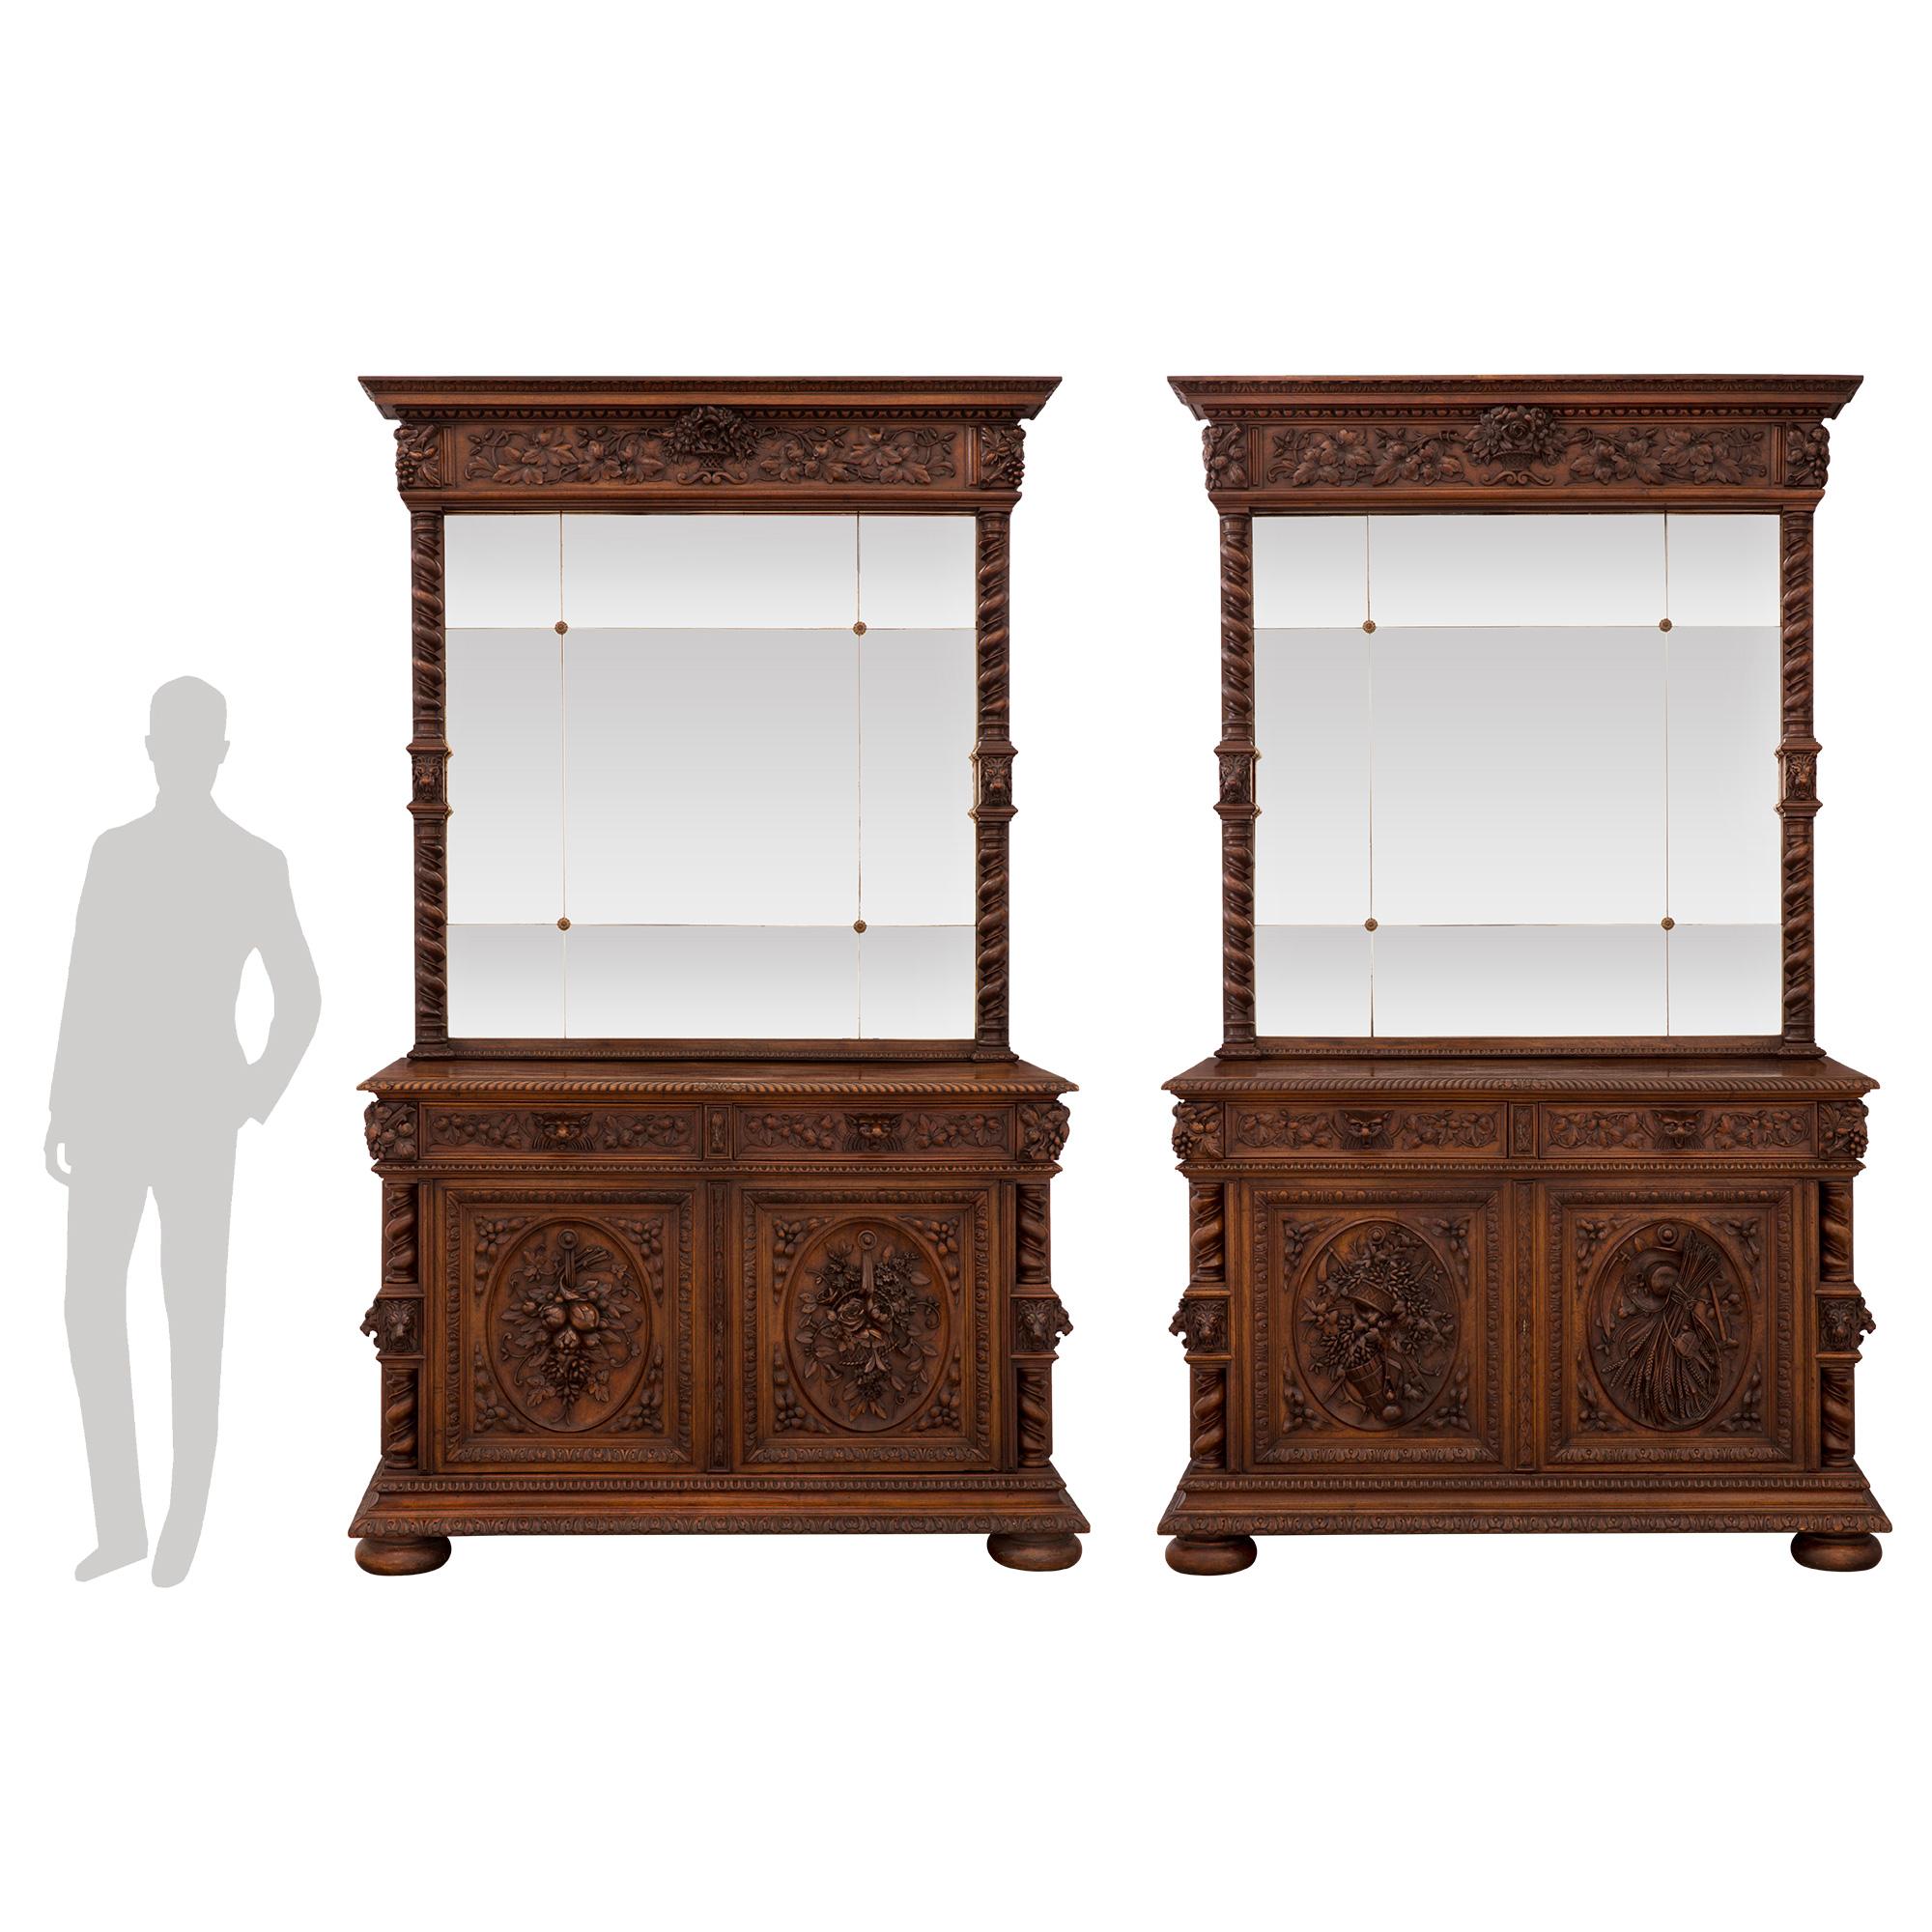 A spectacular and most impressive pair of French 19th century Louis XIII st. walnut buffets with their matching mirrors depicting the four seasons. Each buffet is raised by bun feet below an elegant carved floral band. At the center of each buffet